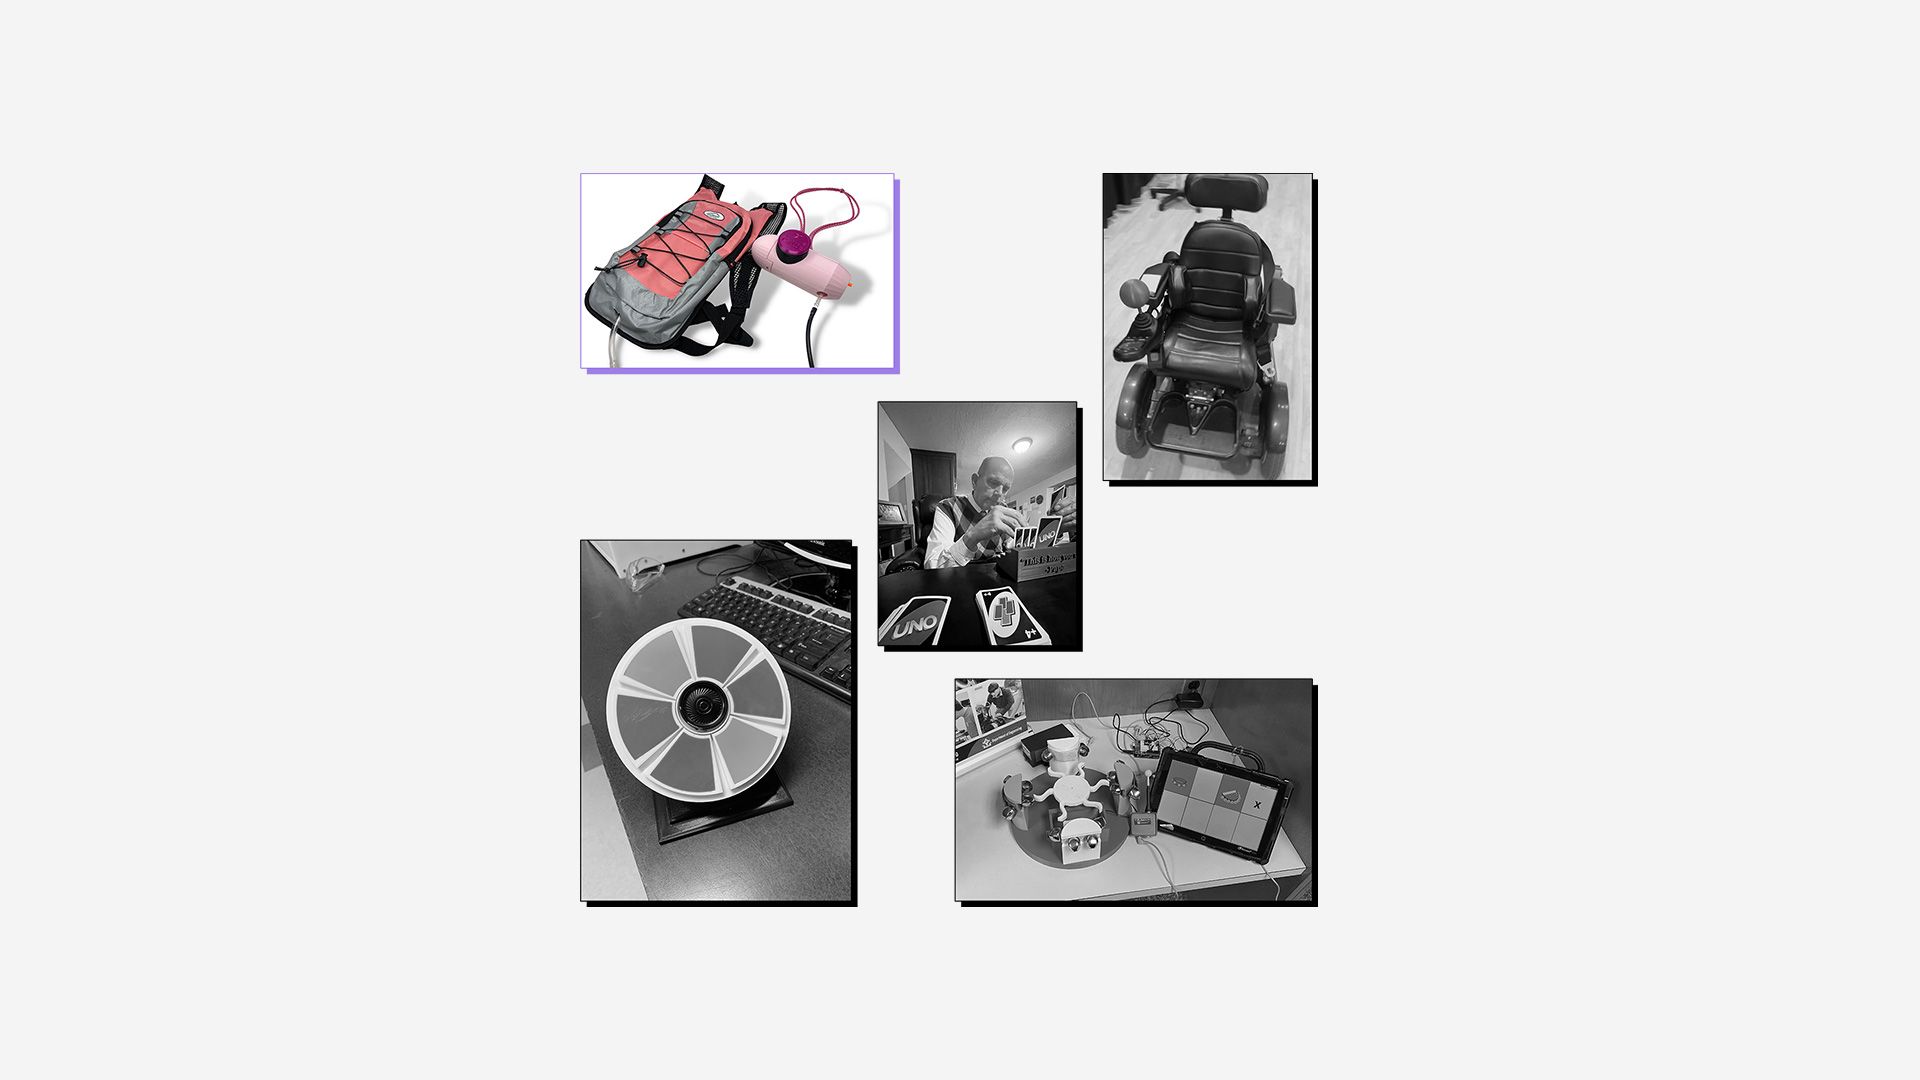 Collage of 3D printed assistive devices with winning entry (adaptive water gun) highlighted.